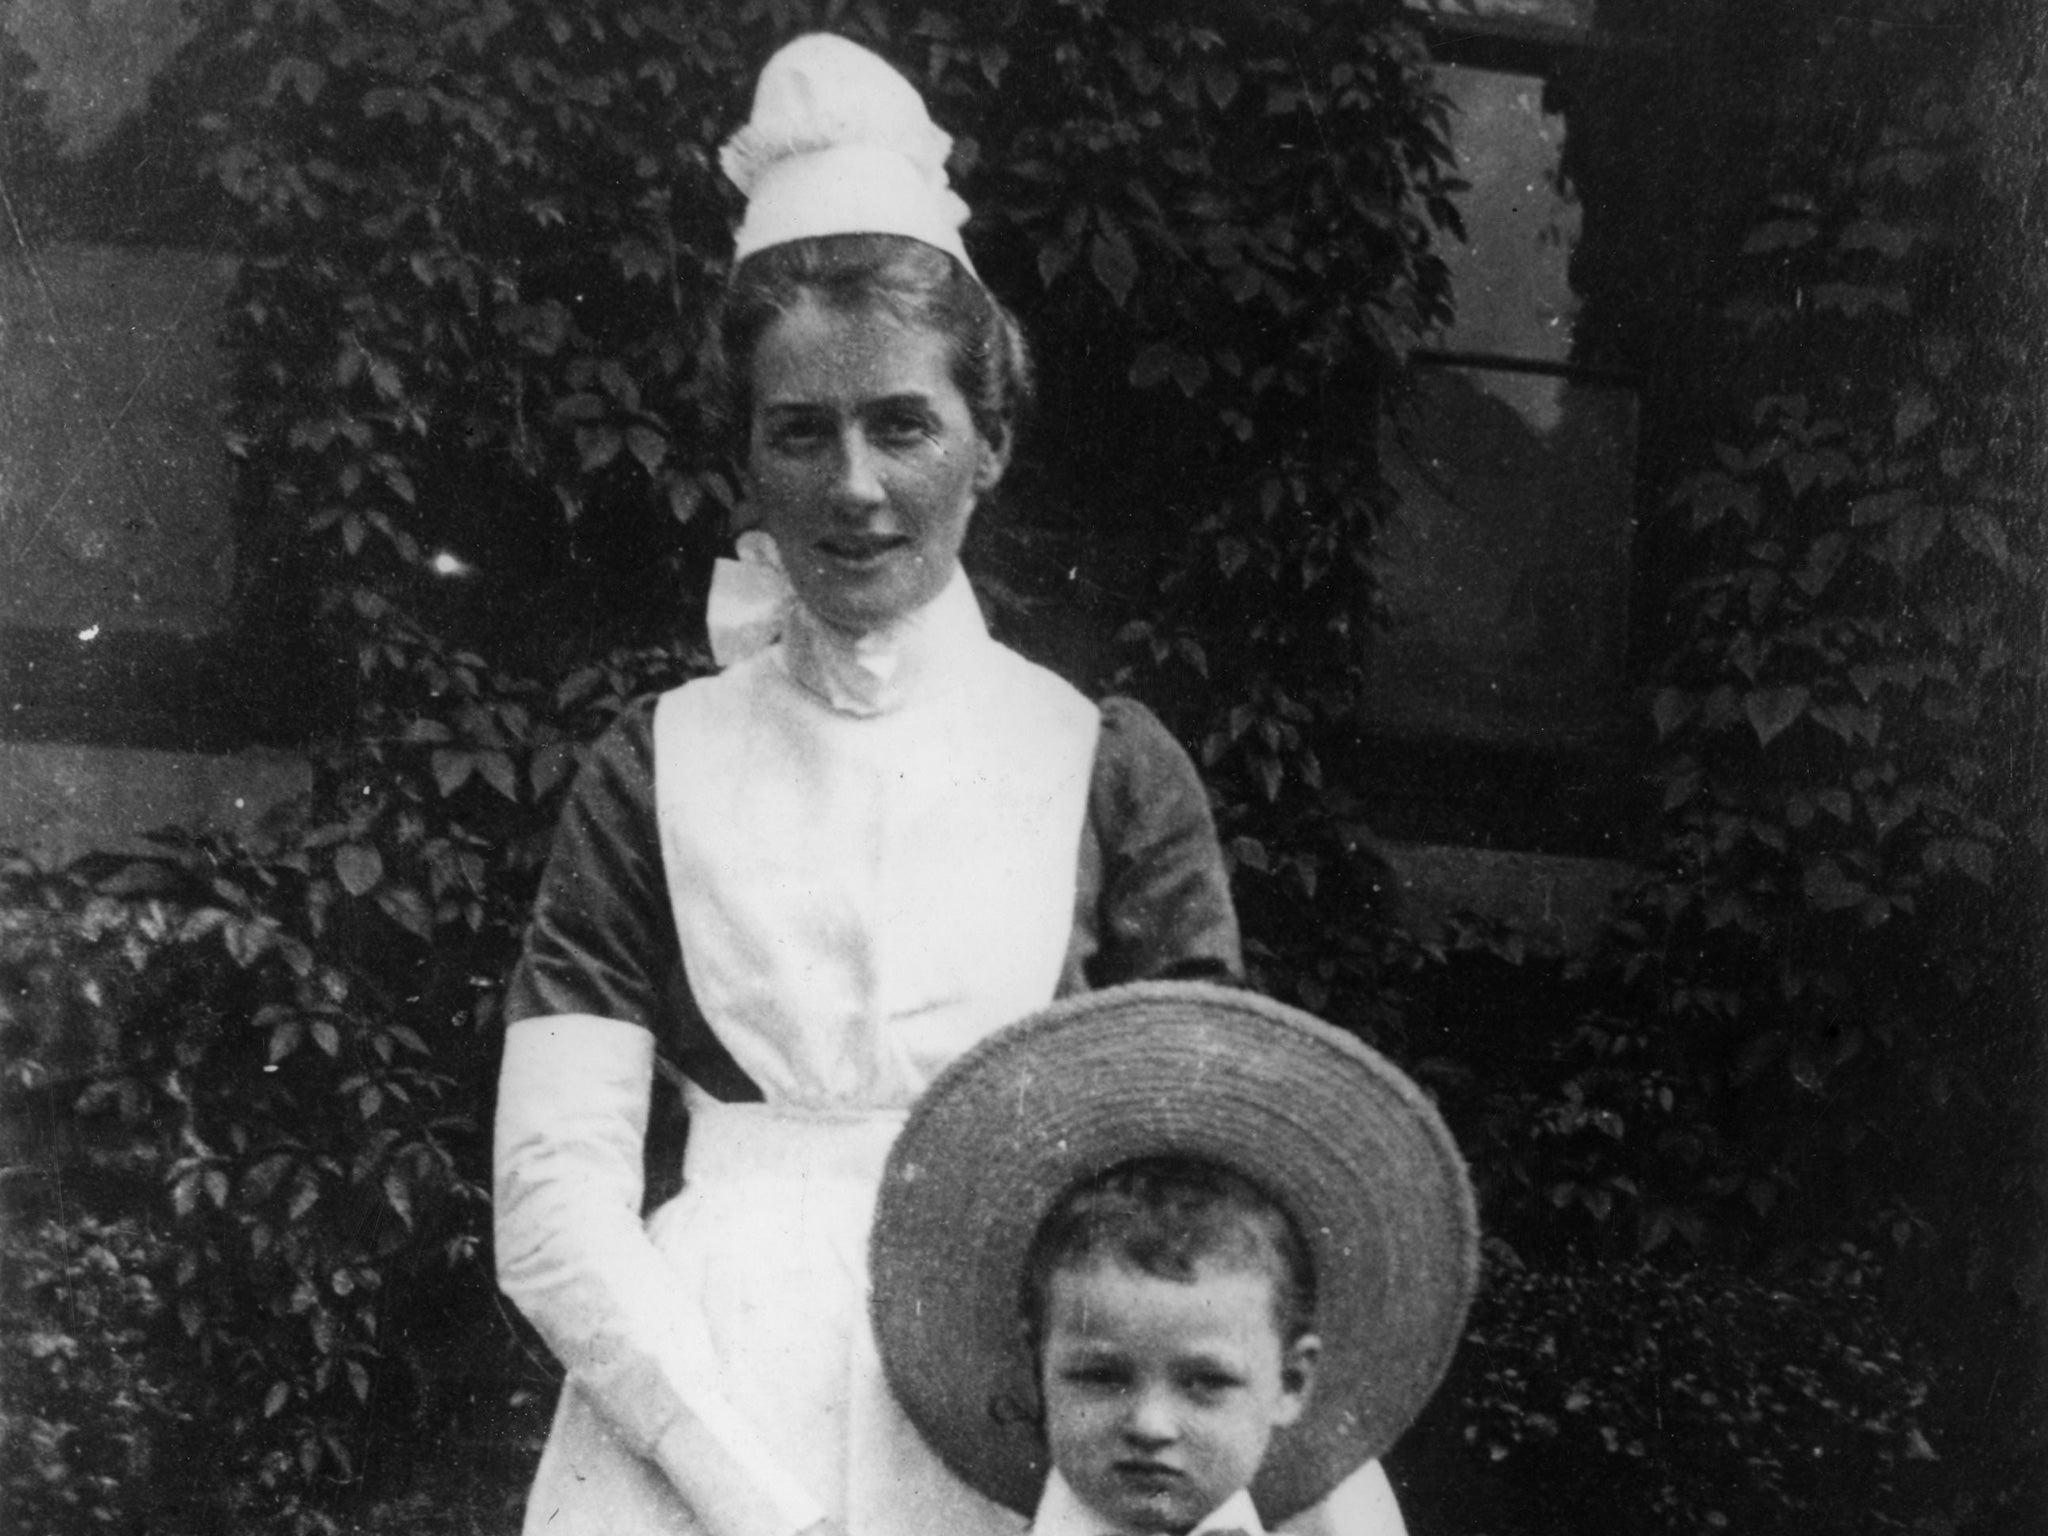 British nurse Edith Cavell, pictured in London in 1903, was executed by the Germans for treason